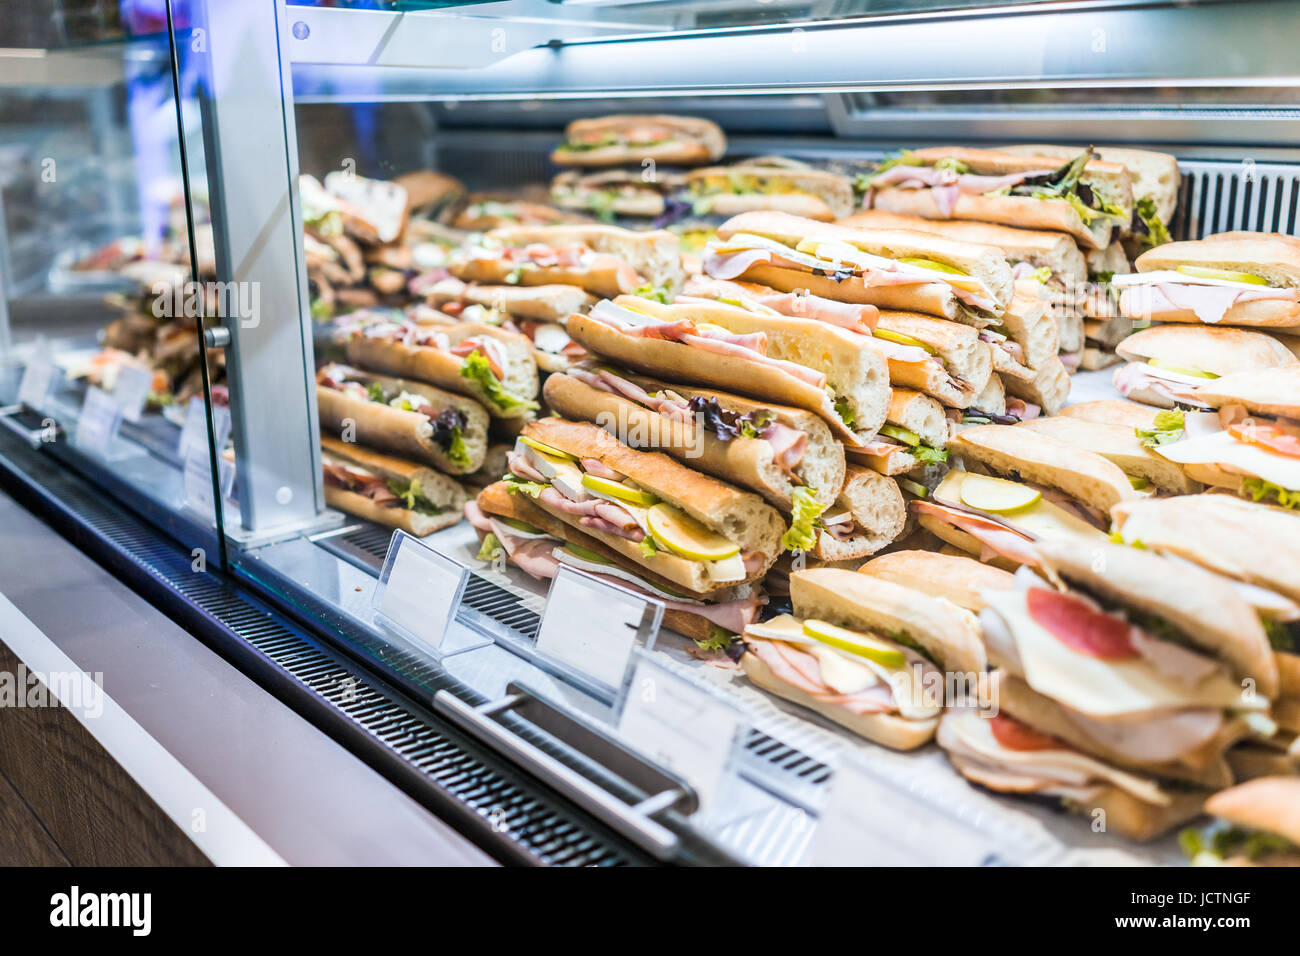 Display of many large sandwiches behind glass window of store stuffed with ham, cheese and cucumbers Stock Photo